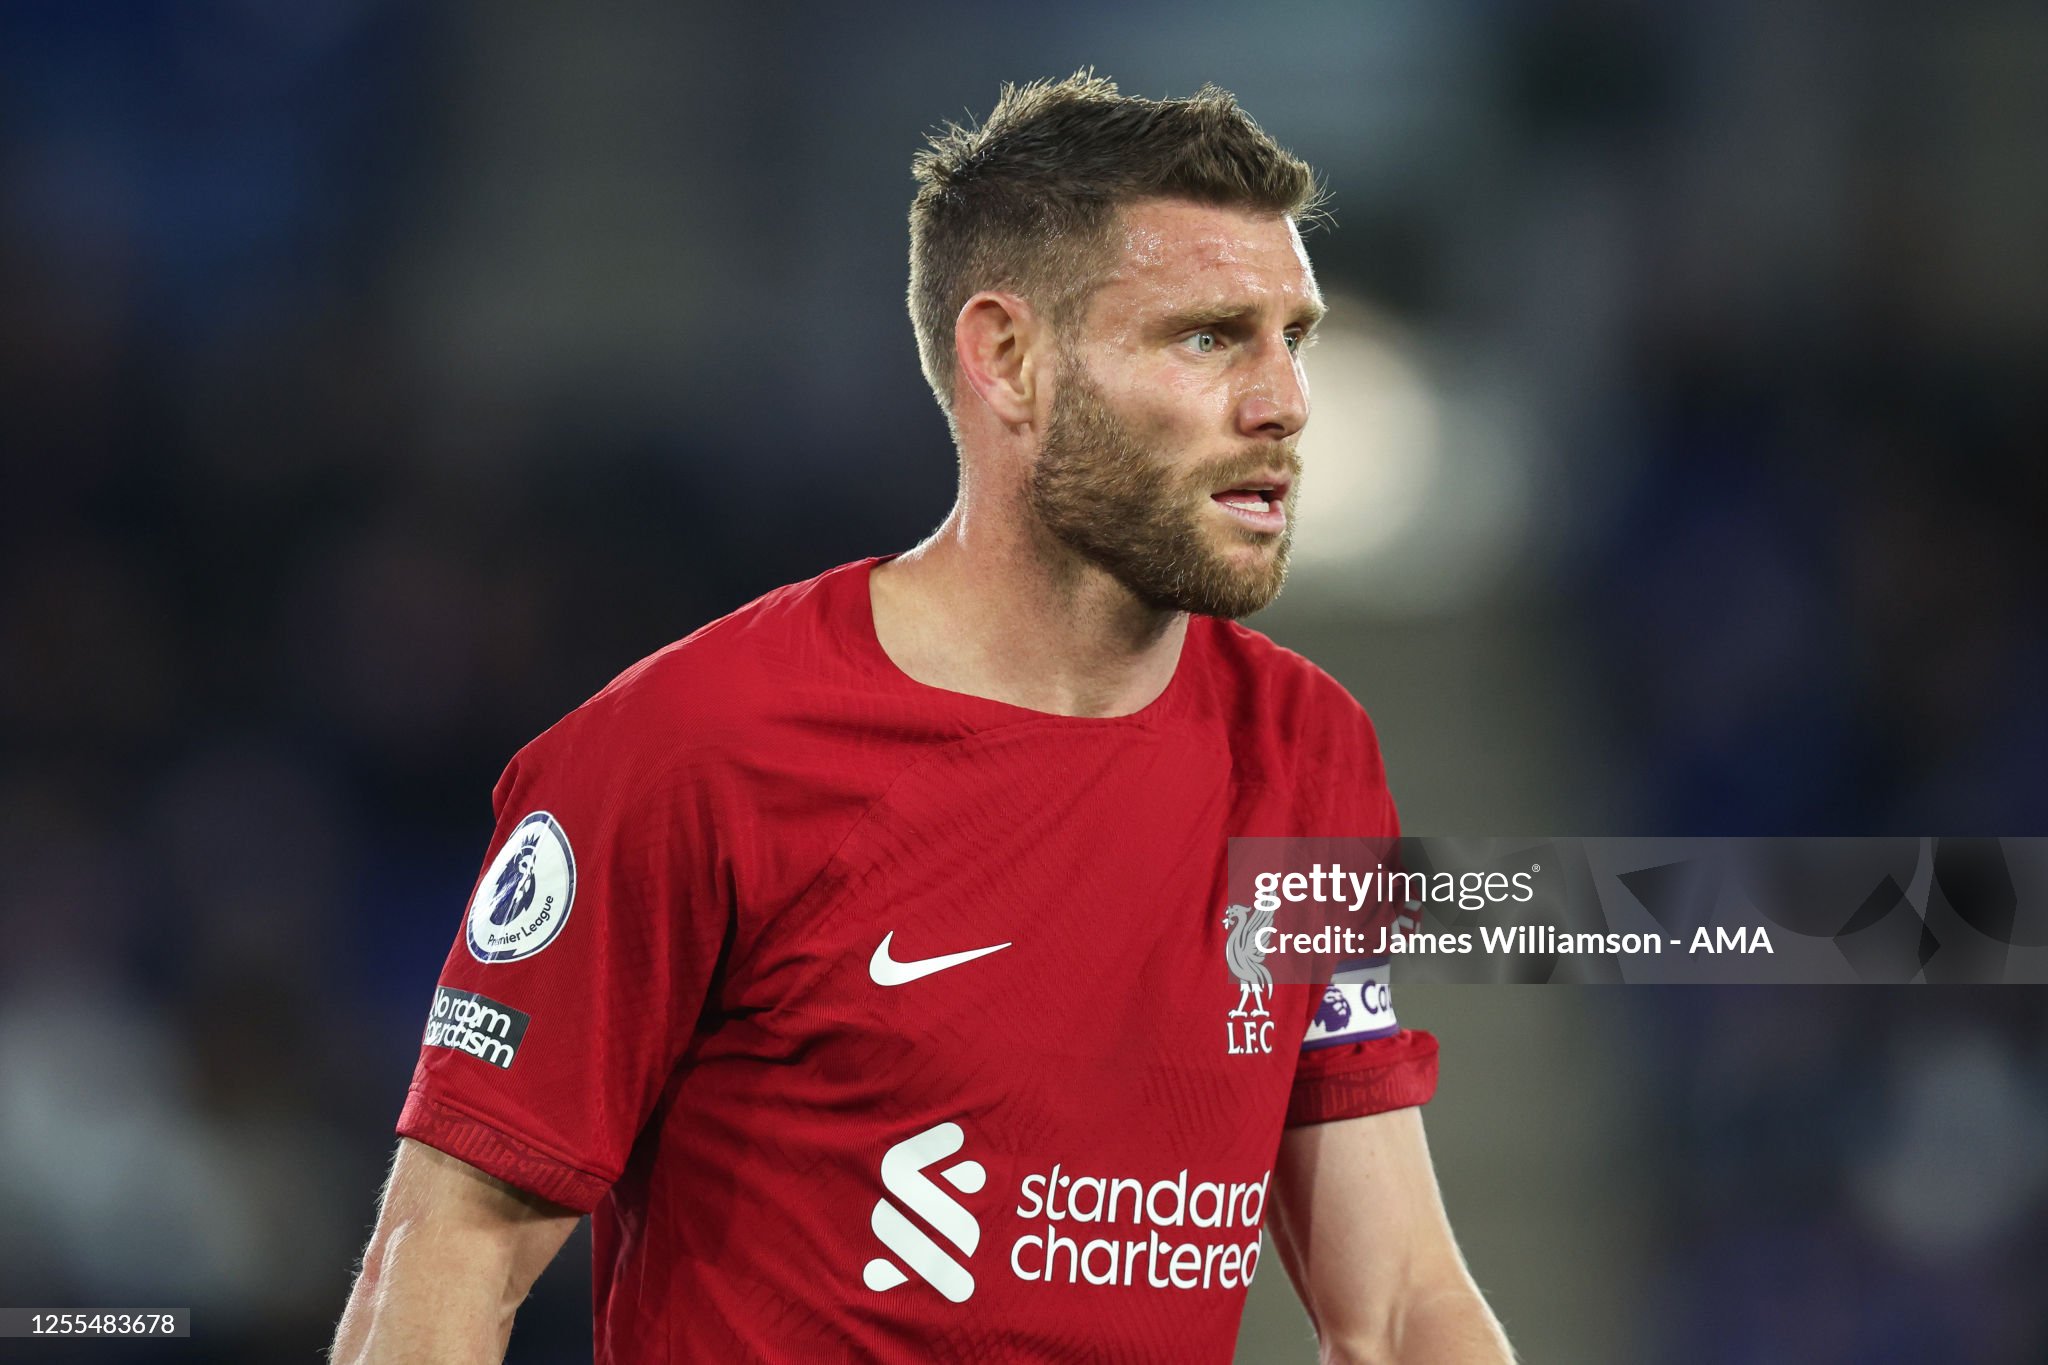 Liverpool has a very special farewell gift for departing Milner